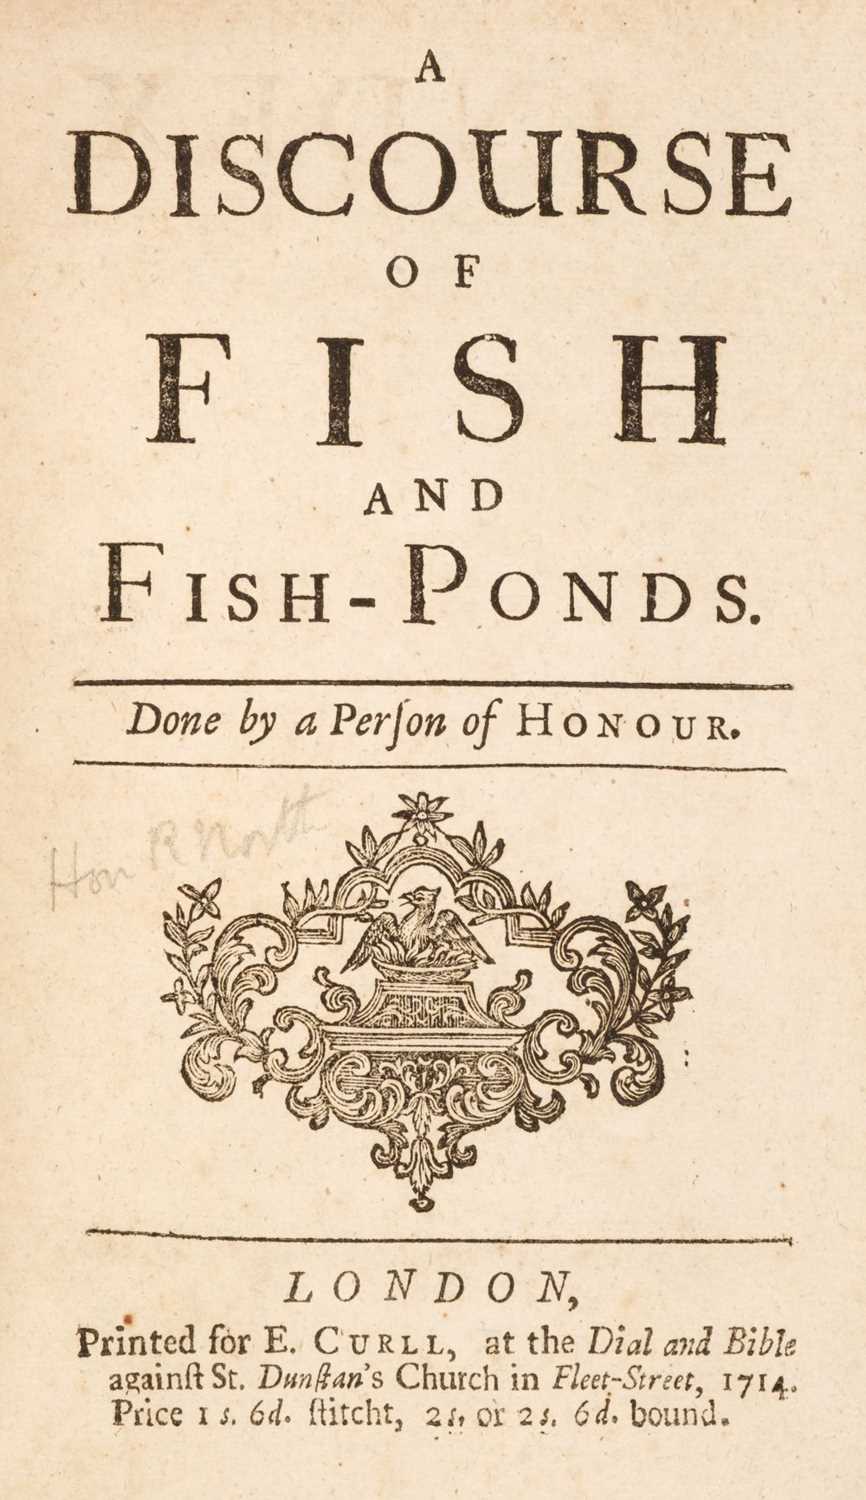 Lot 81 - North, Roger. A Discourse of Fish and Fish-Ponds, 2nd edition, E. Curll, 1714